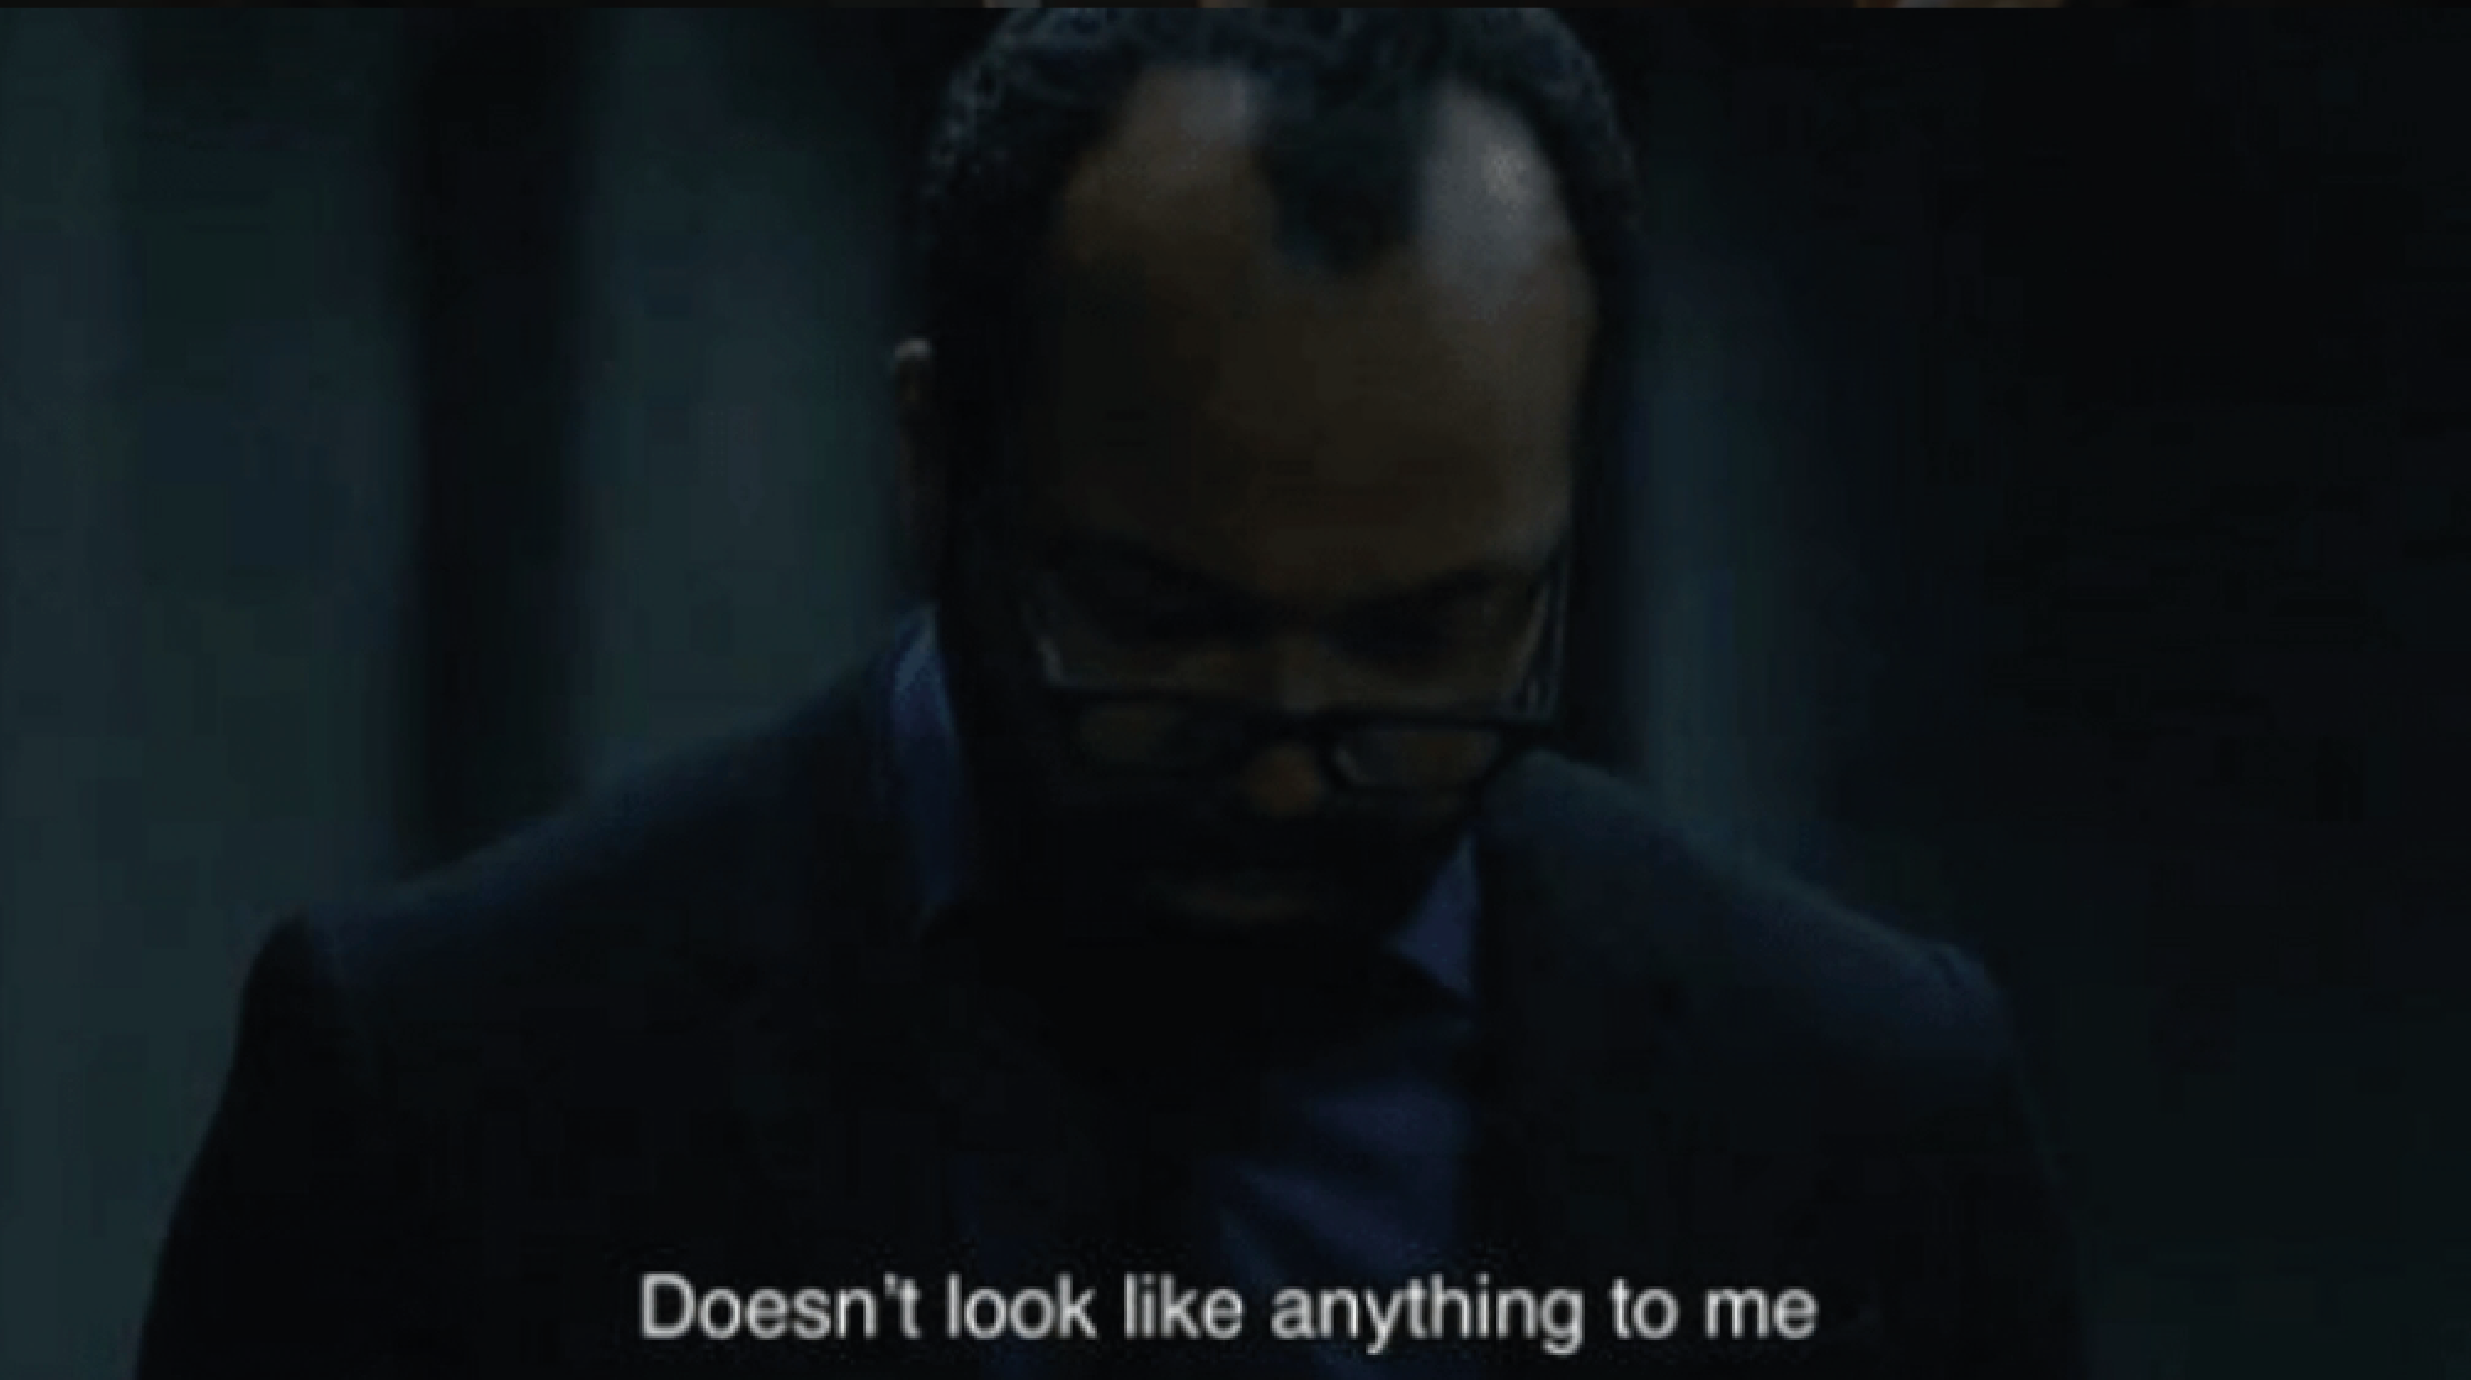 In the TV show Westworld, androids are stumped by anything that does not fit their programming – for instance any kind of evidence that they are not human.